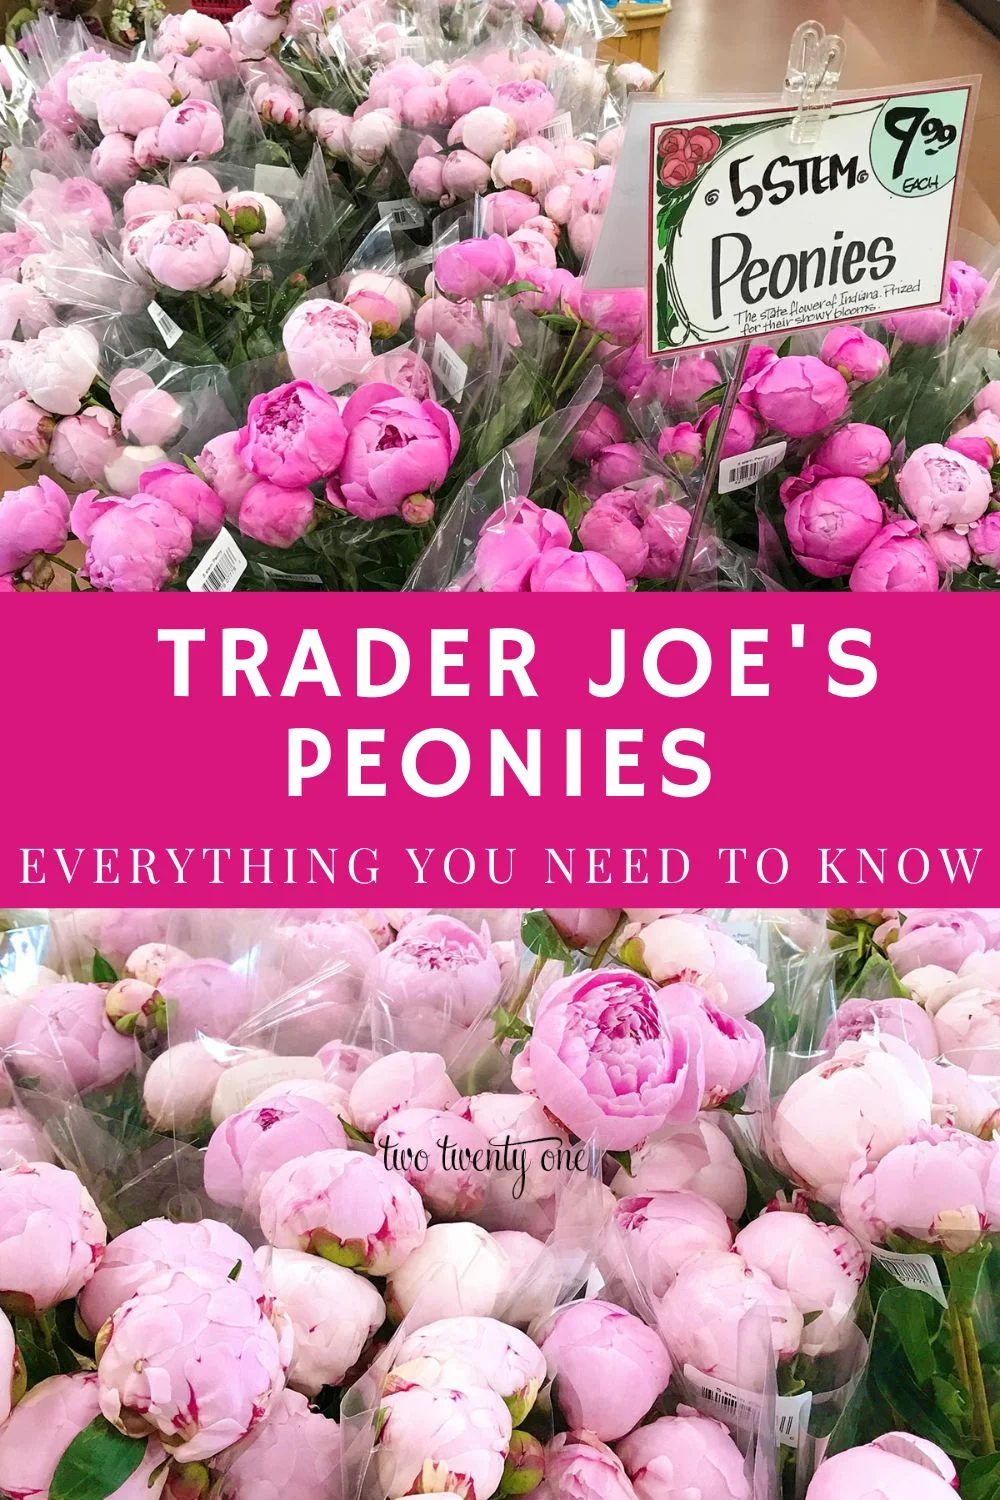 Photos of peonies displayed at Trader Joe's with overlay text reading "Trader Joe's Peonies - everything you need to know".